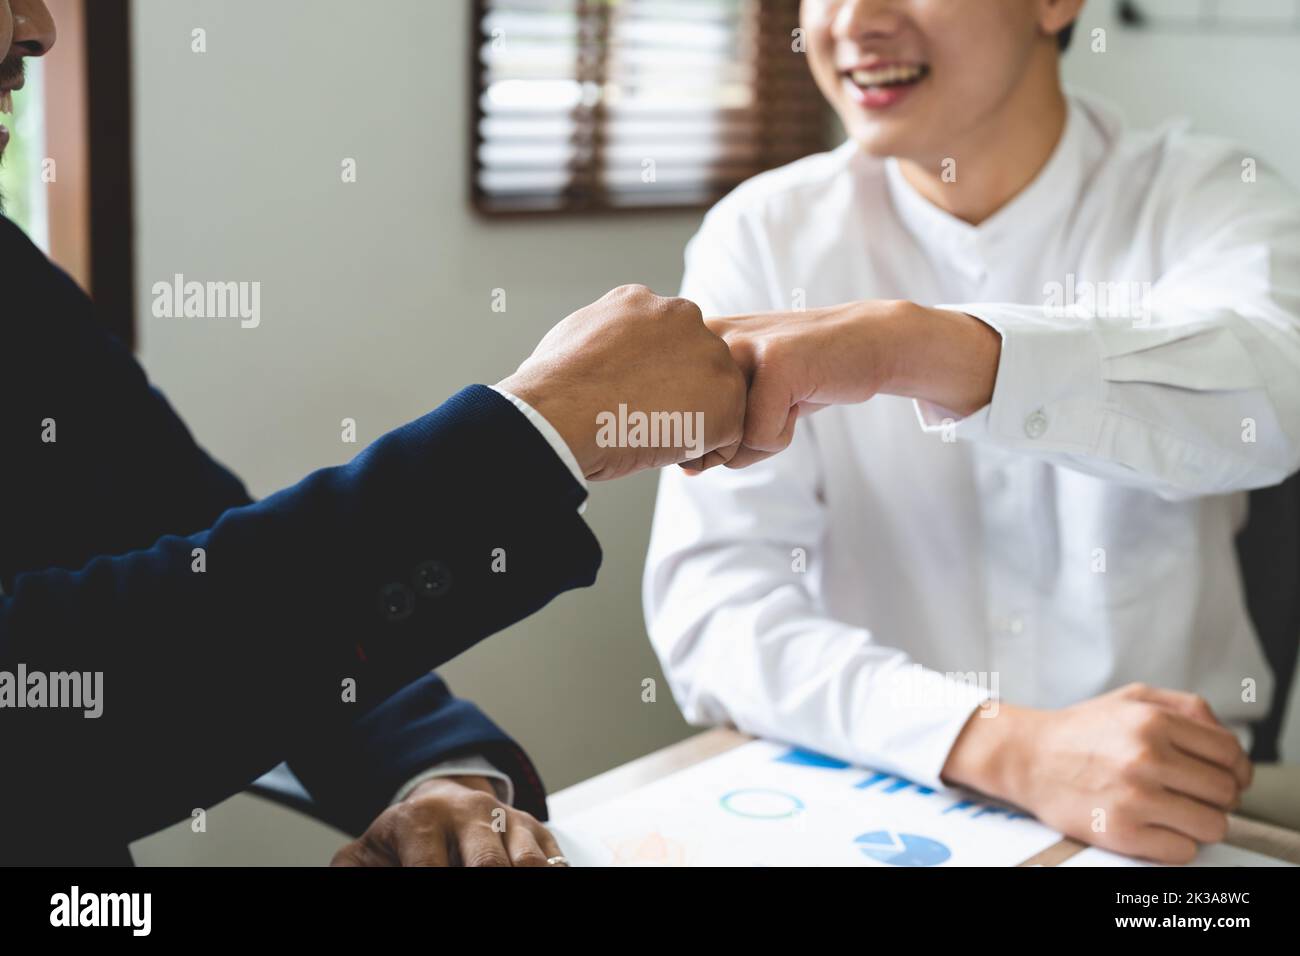 Business people showing Fist Bump after meeting partnership. Teamwork Concept. Stock Photo